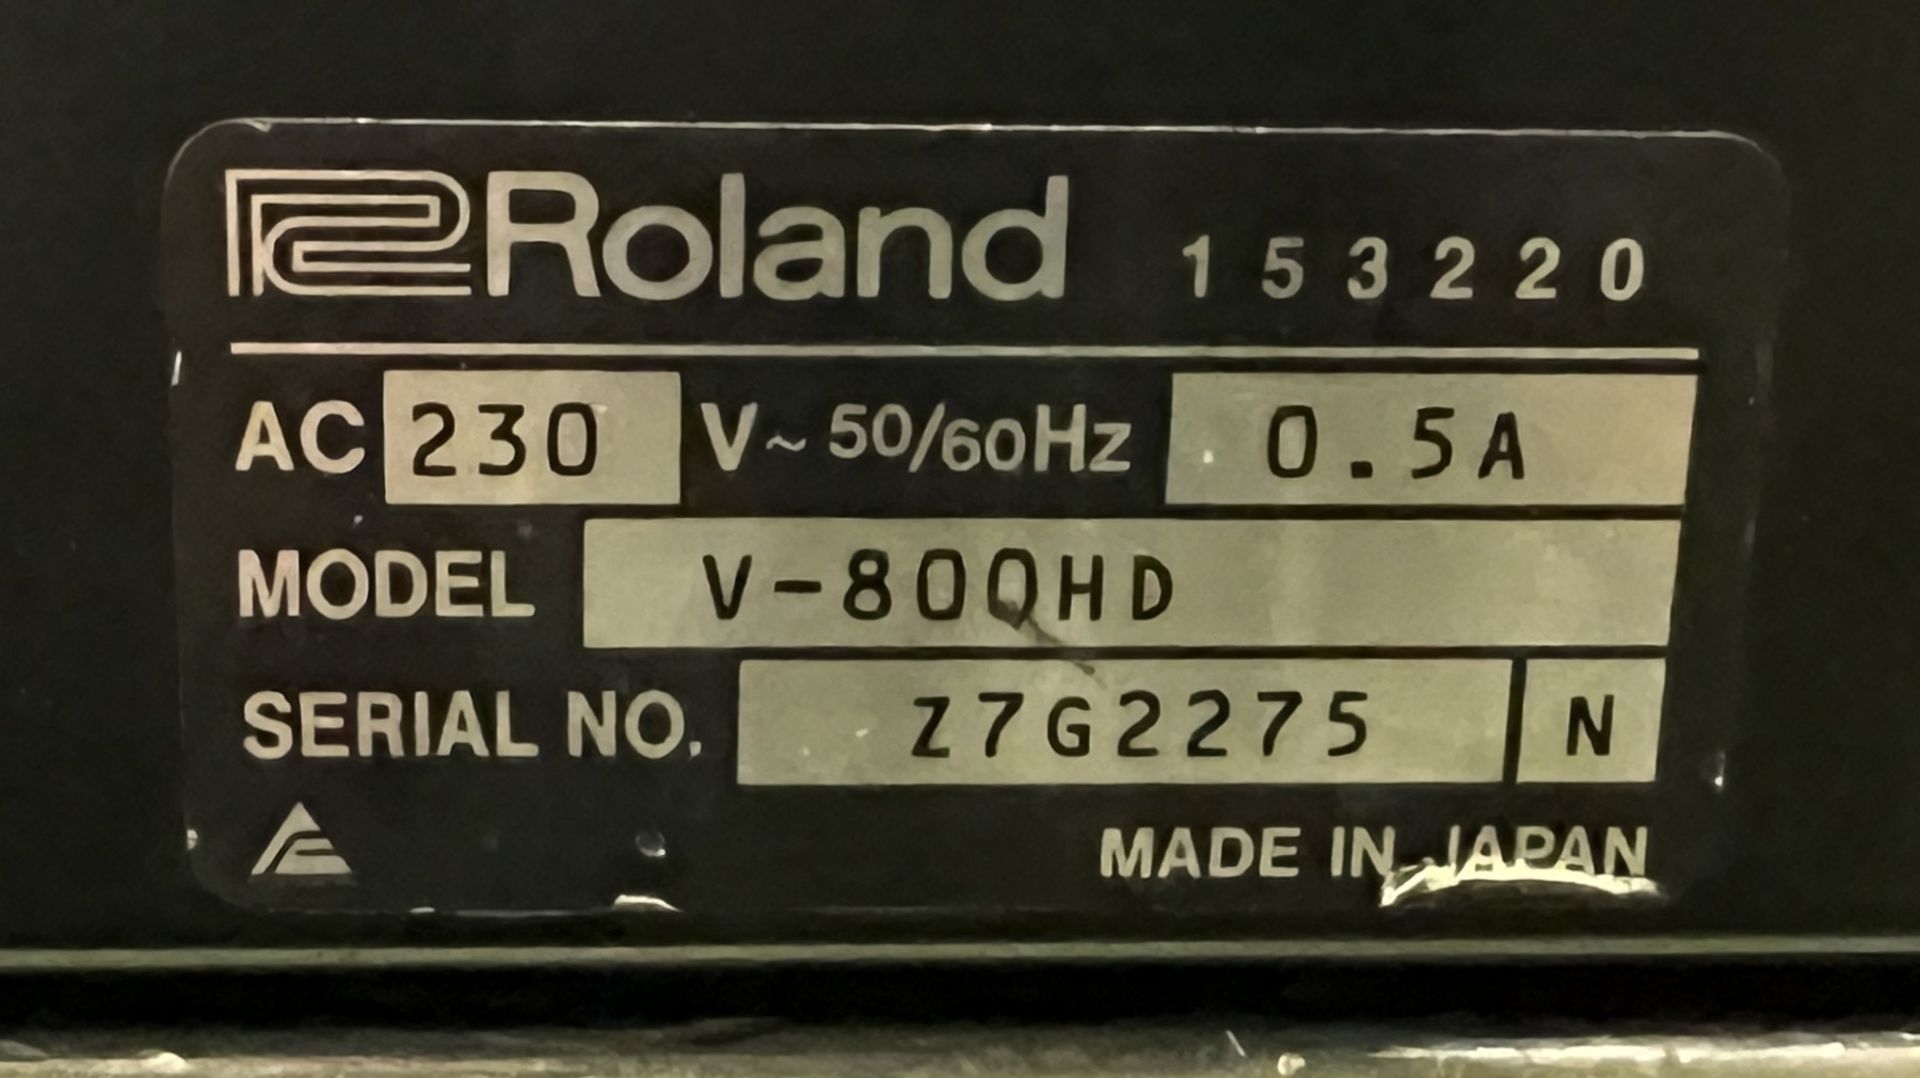 Roland V800HD vision mixer in flight case - case dimensions: L 690 x W 370 x H 230mm - FAULTY OUTPUT - Image 6 of 8